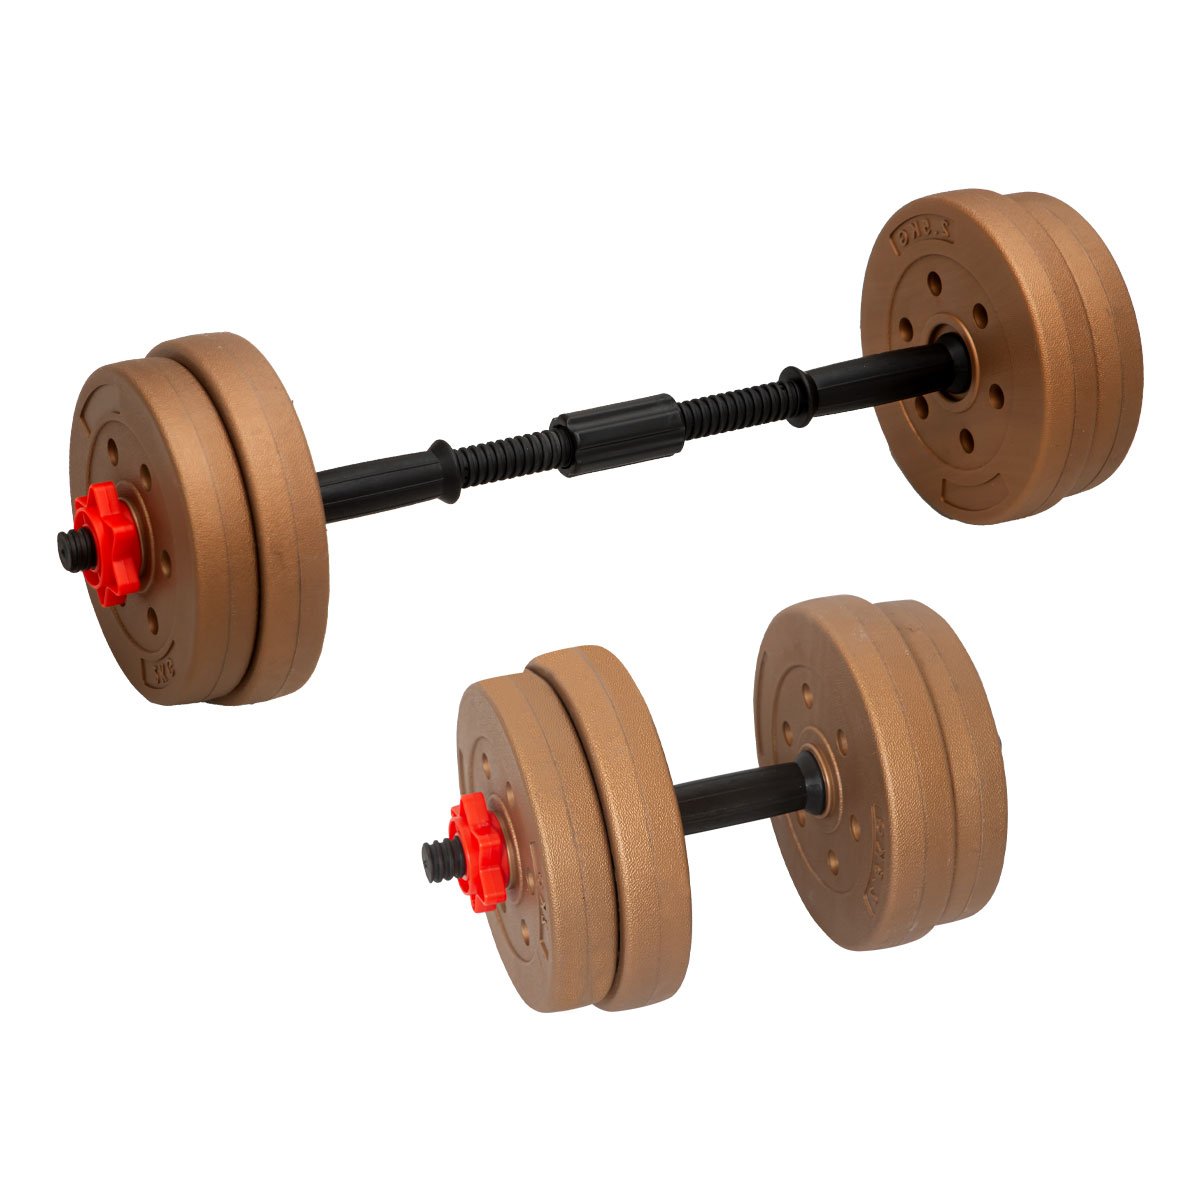 Powertrain 20kg Home Gym Adjustable Dumbbell and Barbell Weights Set - Gold 2